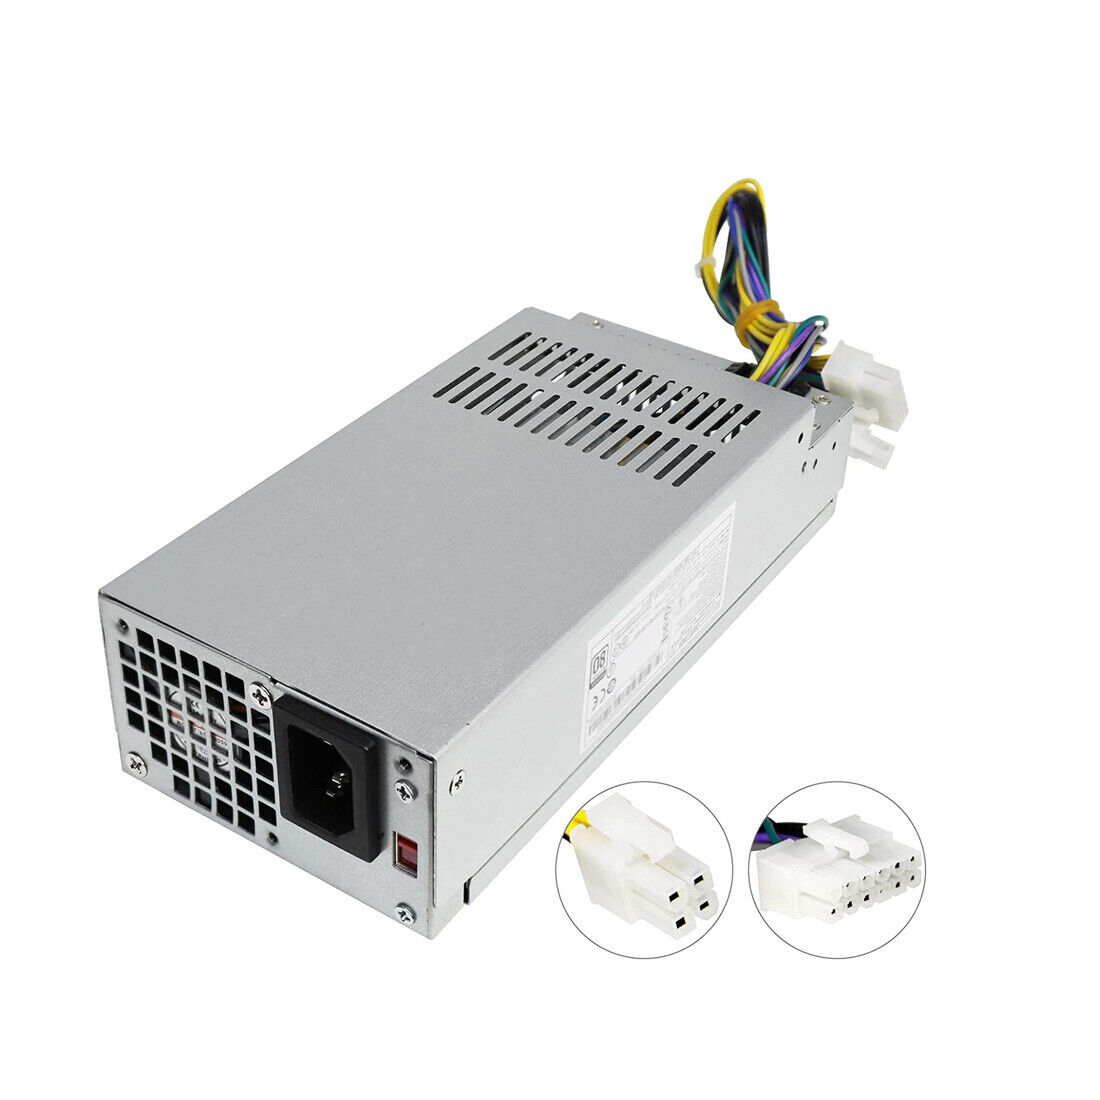 PS-3221-9AE 220W PSU Power Supply For Acer Veriton X4640 X4650 X6630 PS-3221-9AE